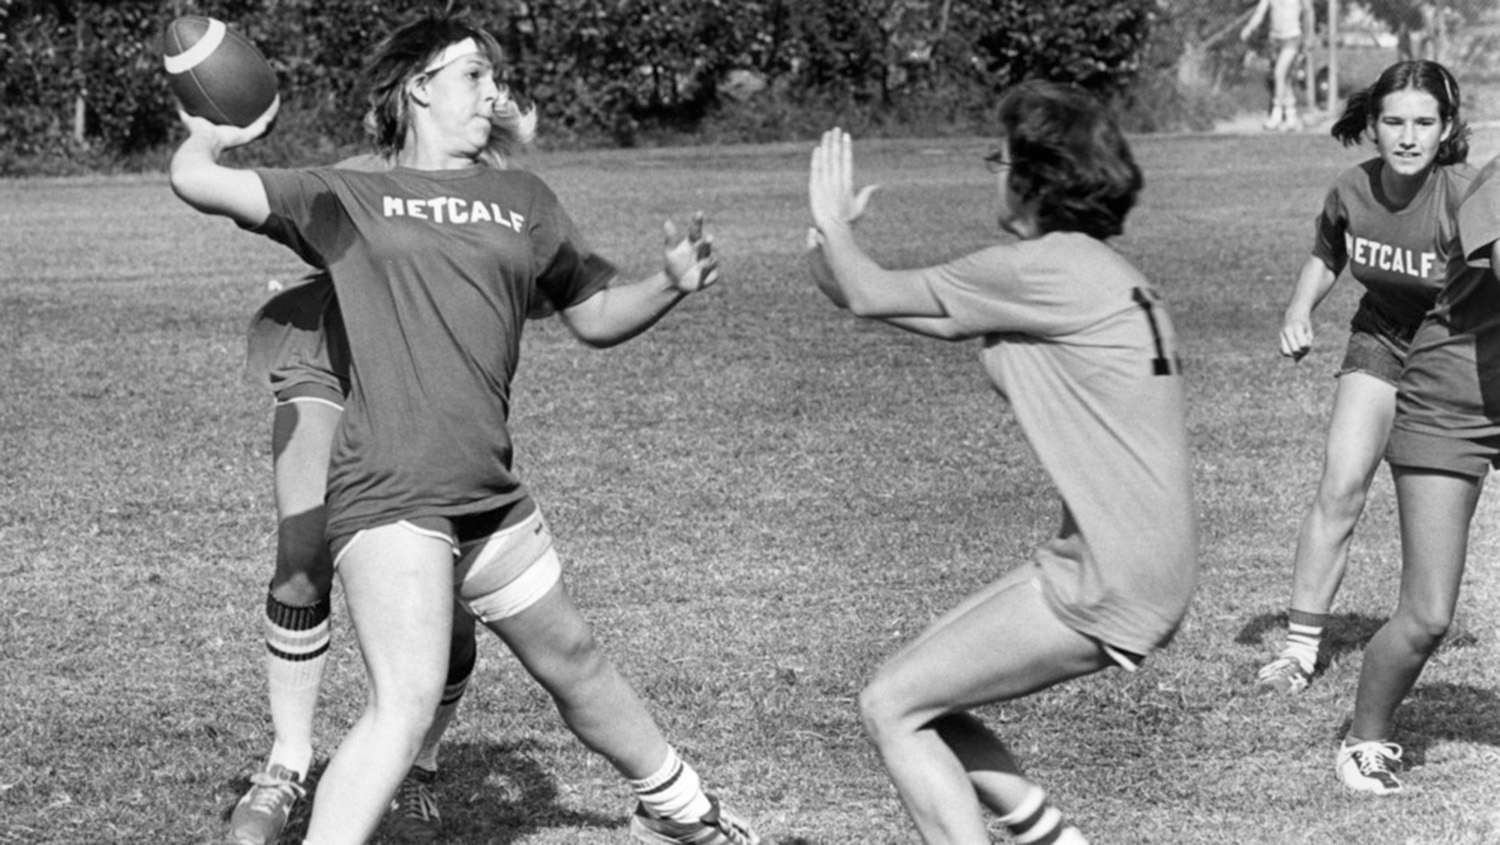 women playing intramural flag football in the 90s